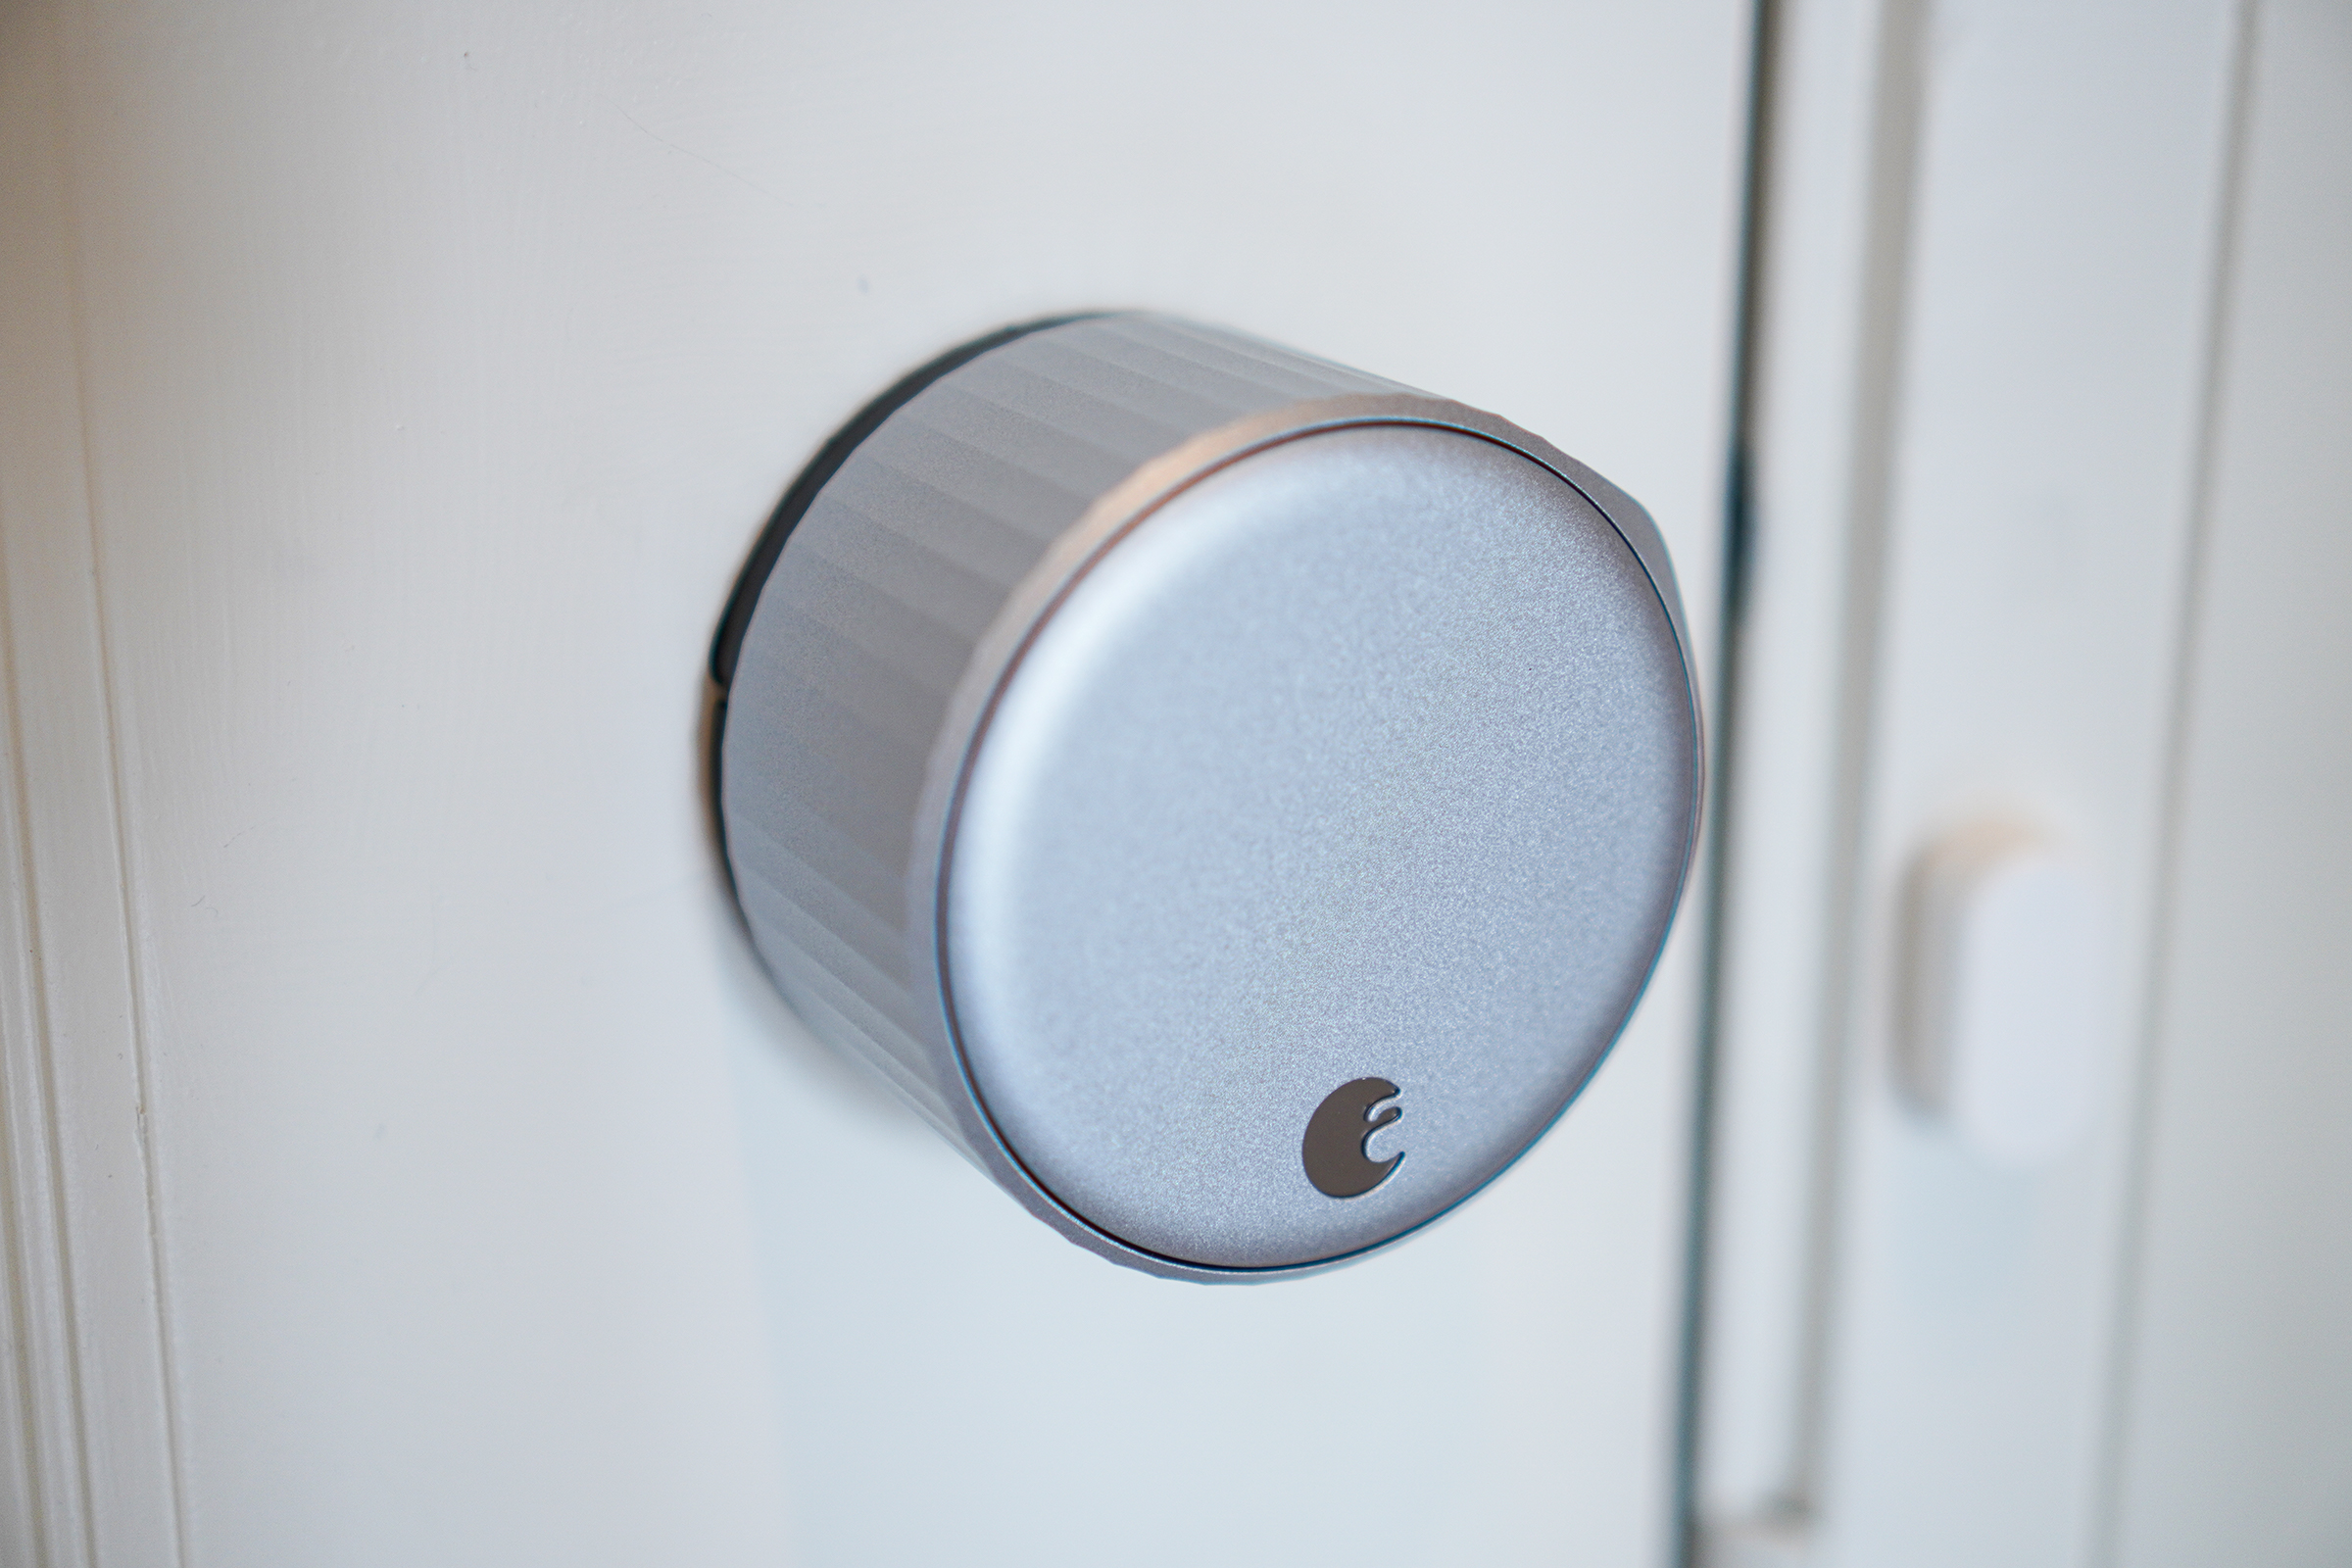 The new August Wi-Fi Smart Lock is now available, and it’s the connected smart lock to beat